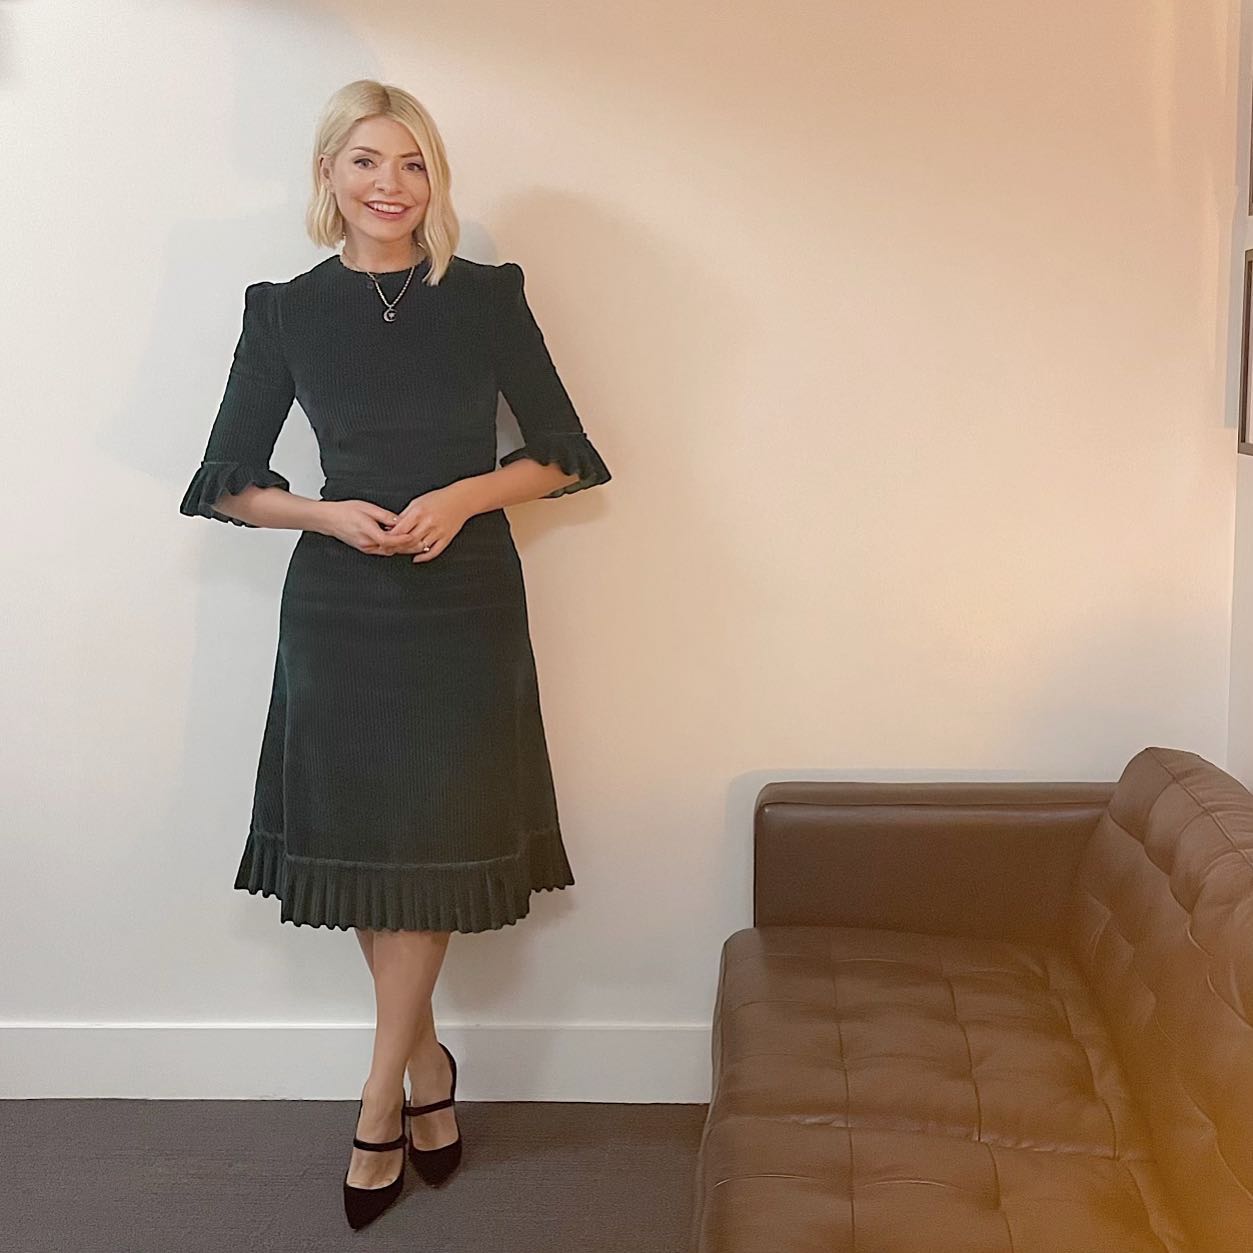 Holly Willoughby Has Worn This Dress Three Times, and She’s Not the Only Celeb